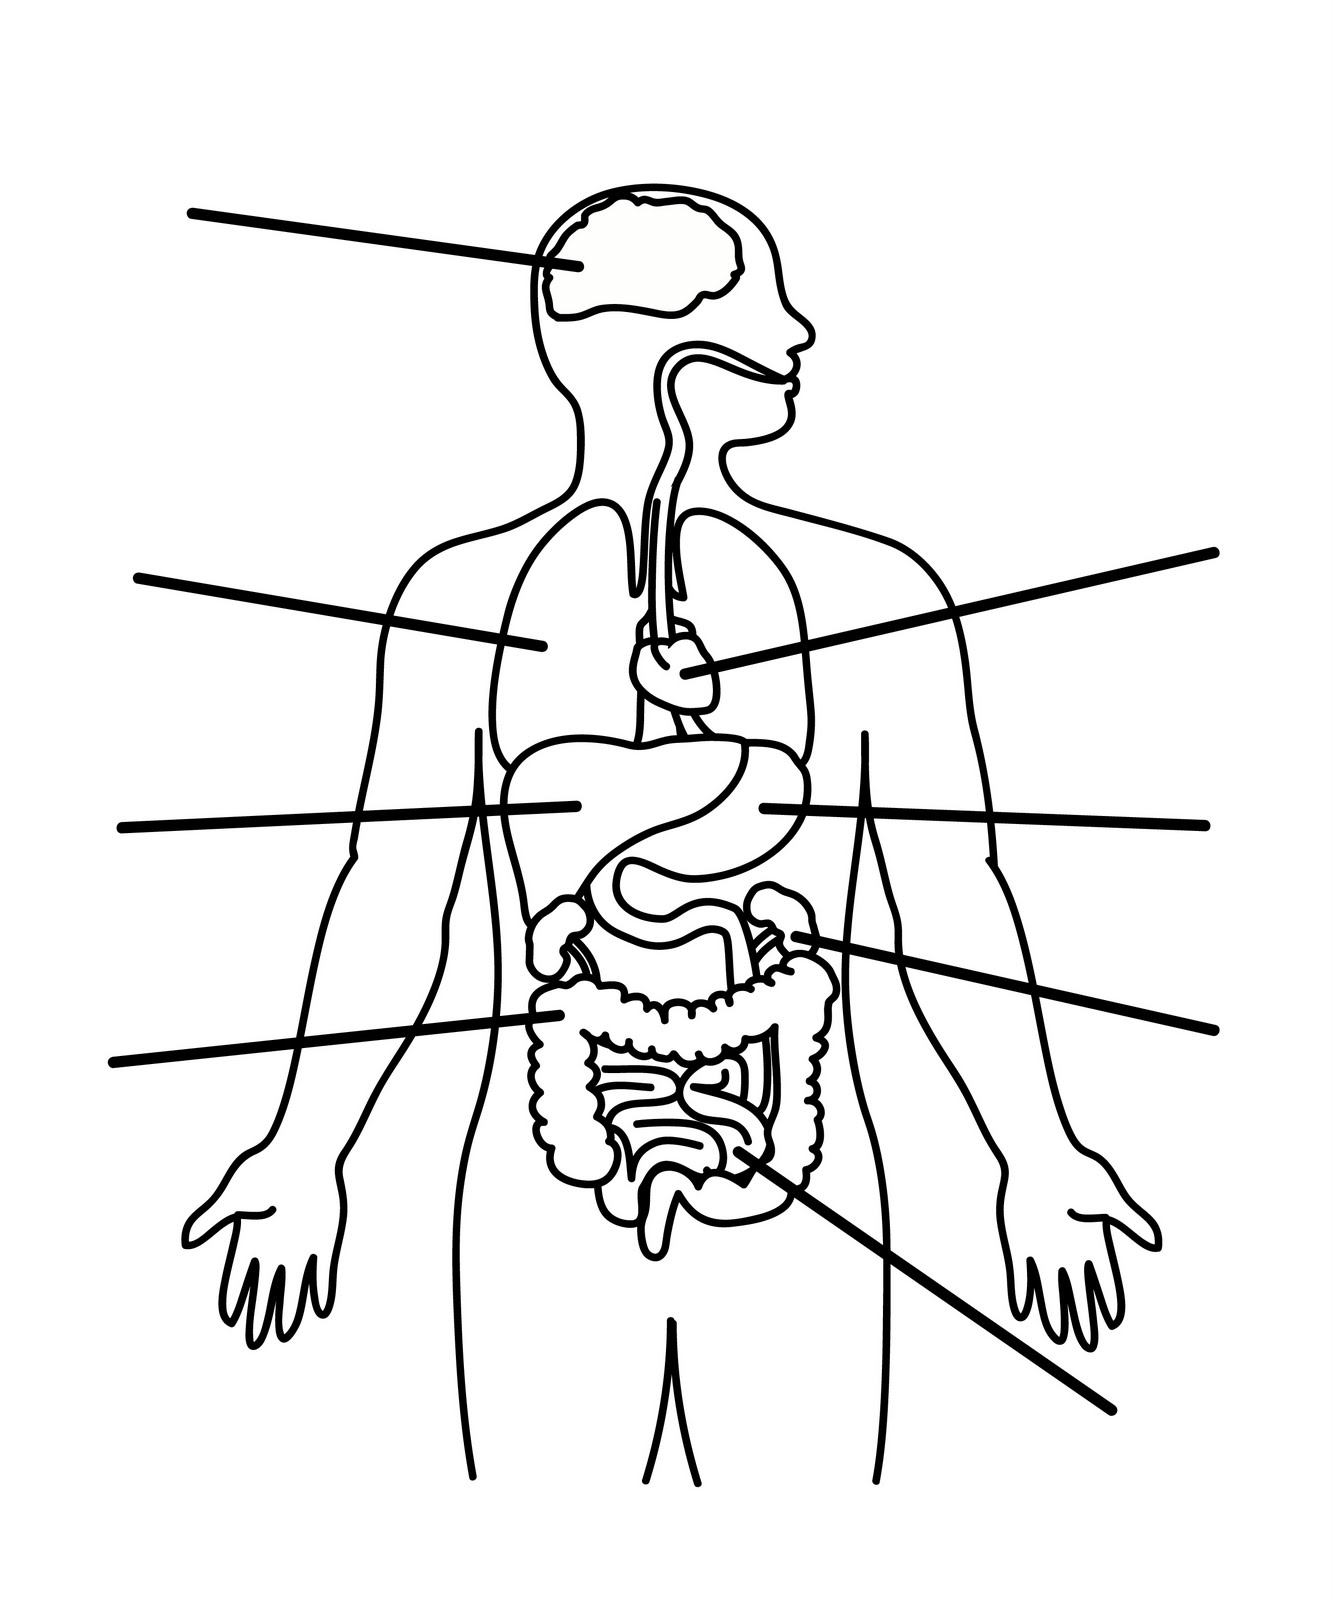 Outline Of A Body | Free download on ClipArtMag